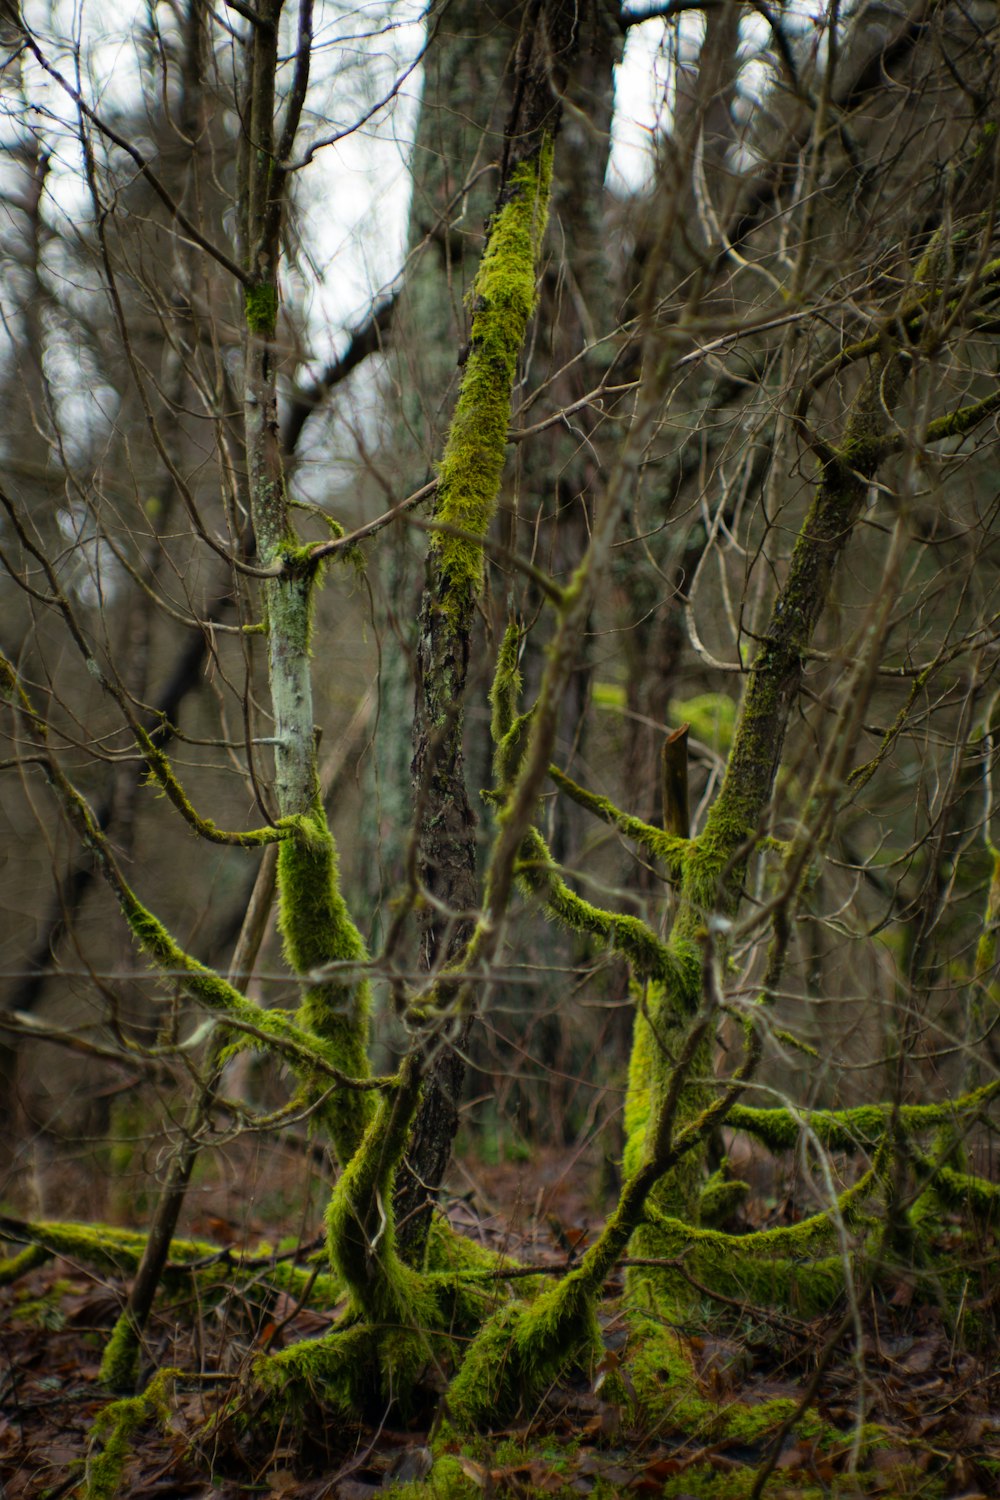 moss covered trees in a forest with no leaves